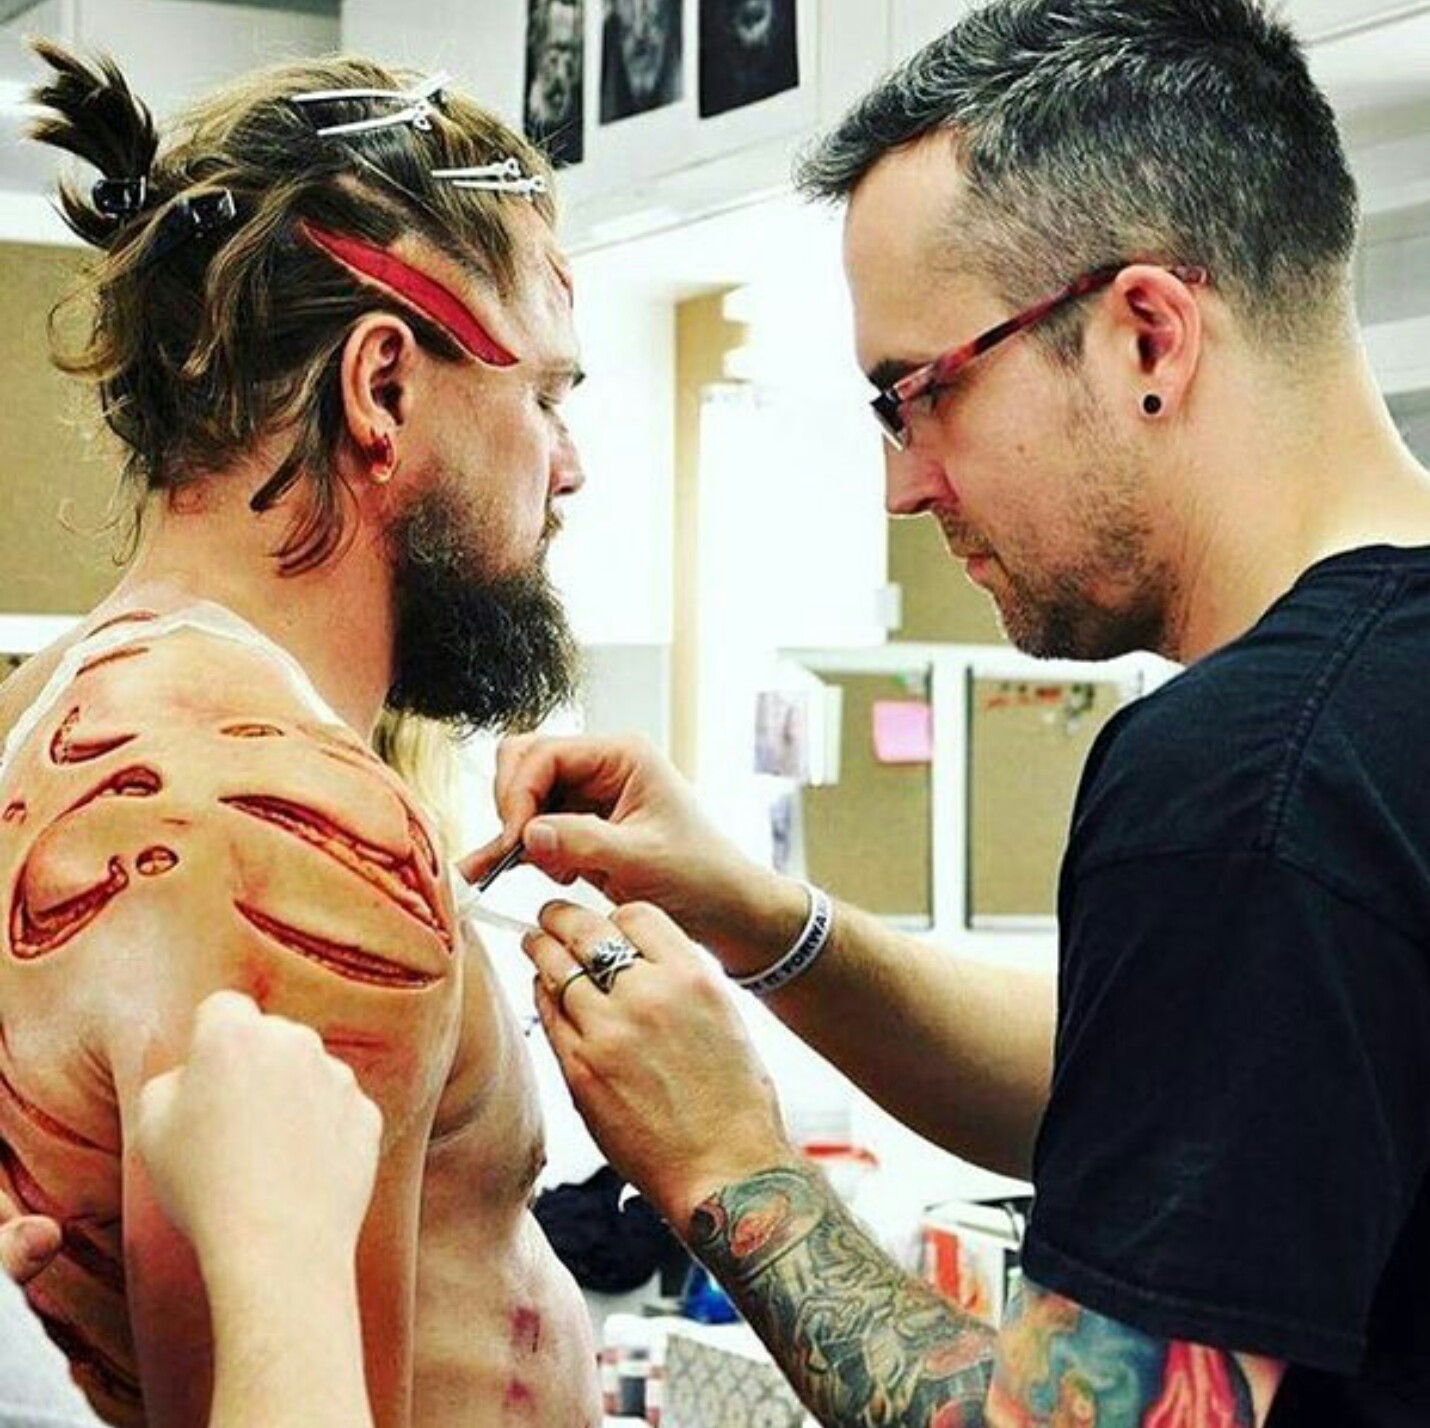 Leonardo DiCaprio getting wounded during the filming of The Revenant